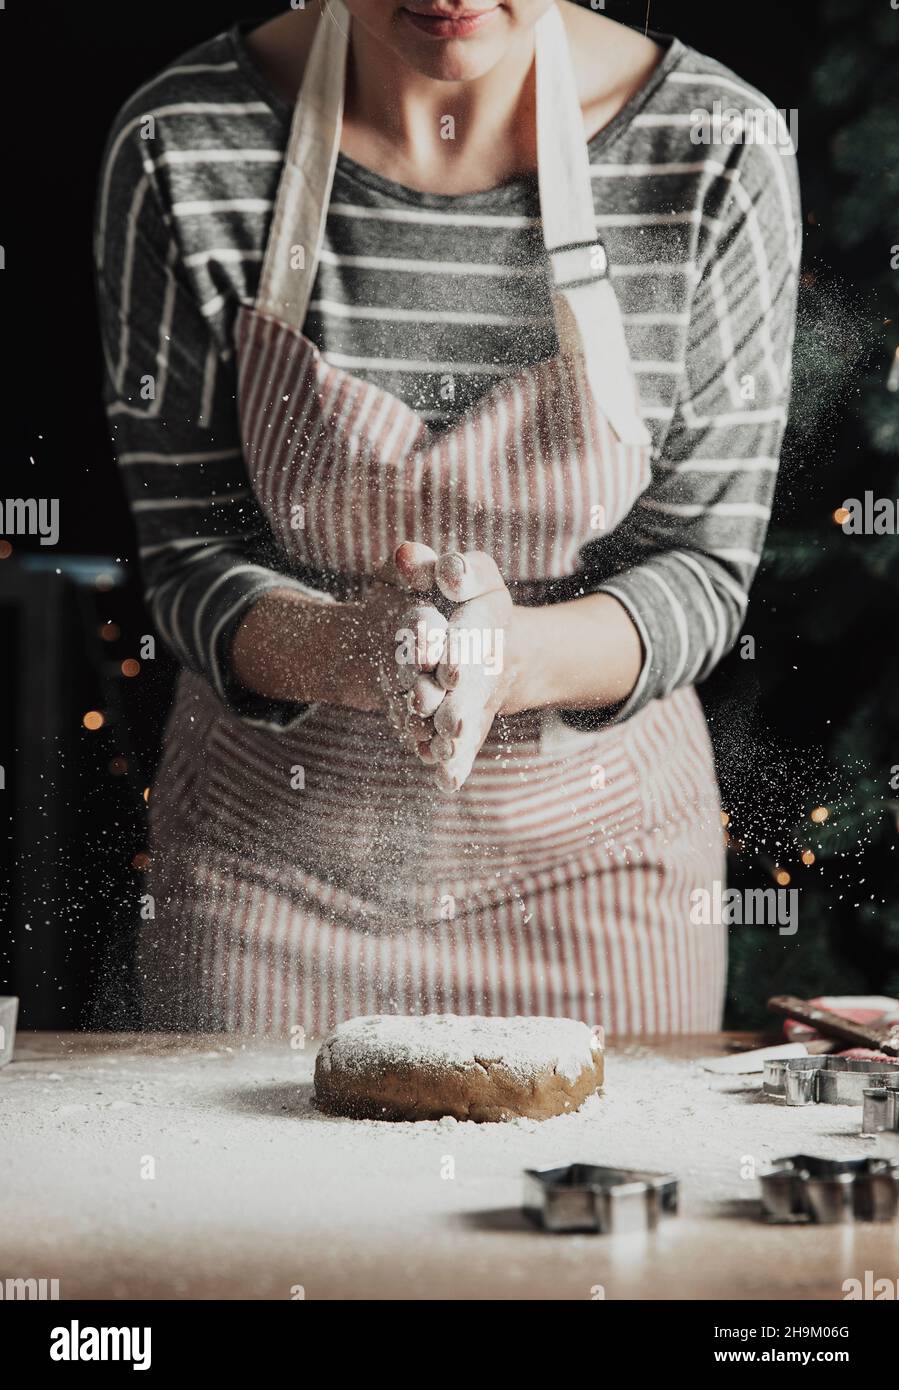 Merry Christmas, Happy New Year. Gingerbread cooking, cake, strudel baking. The woman in apron is preparing cookies. Slapping palms, splashing flour over kneaded dough. Young girl prepare, bake, cook Stock Photo